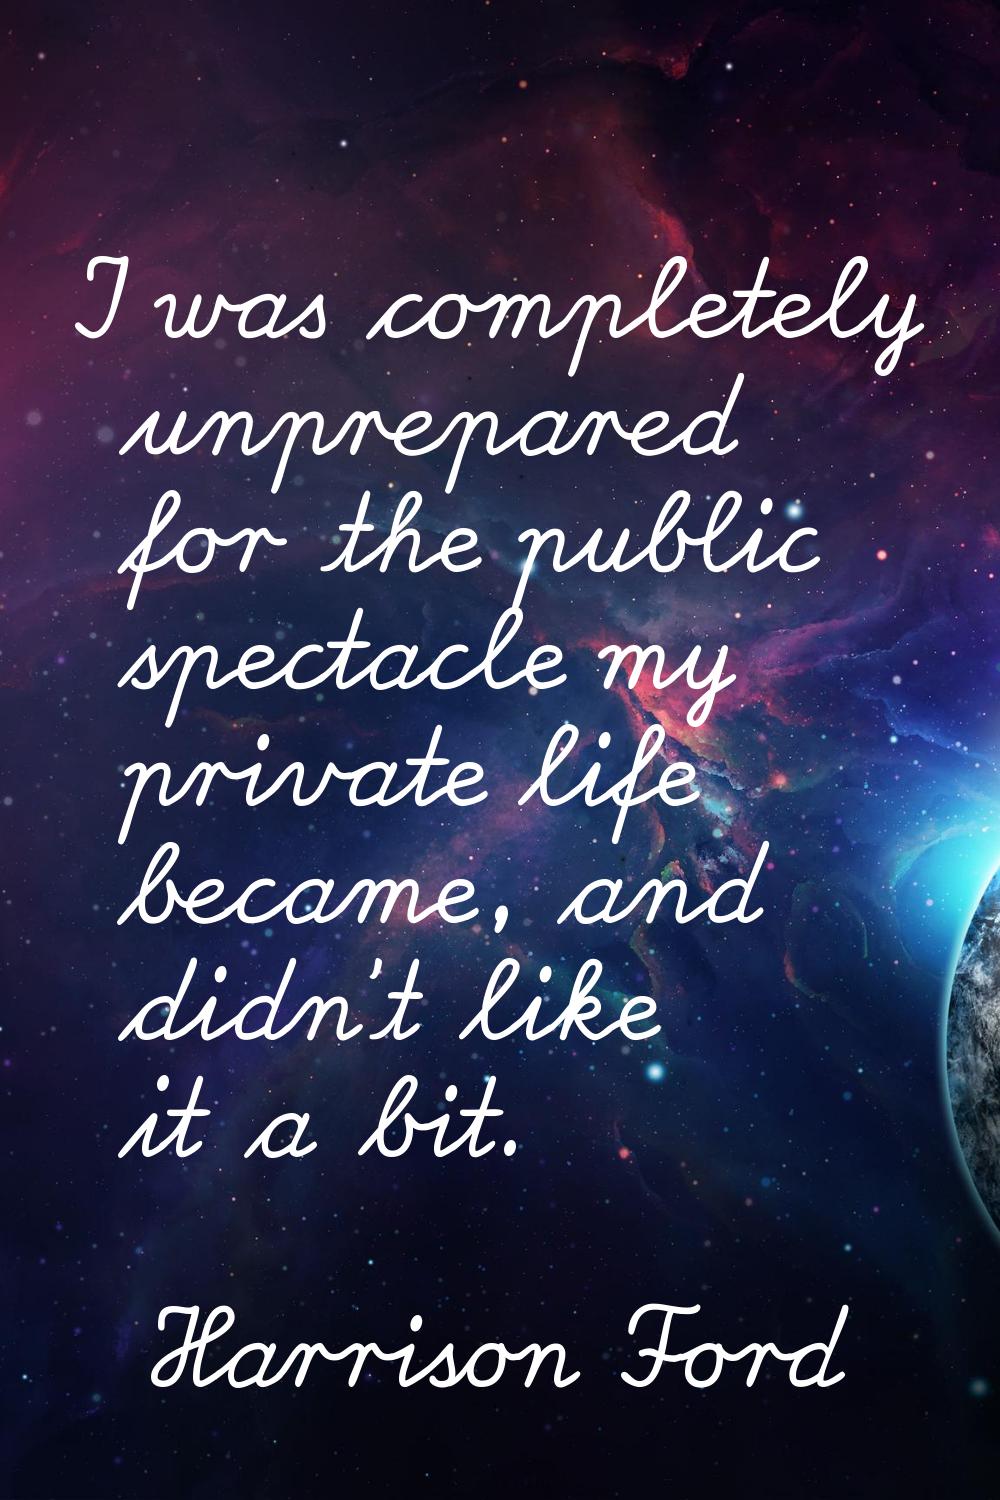 I was completely unprepared for the public spectacle my private life became, and didn't like it a b